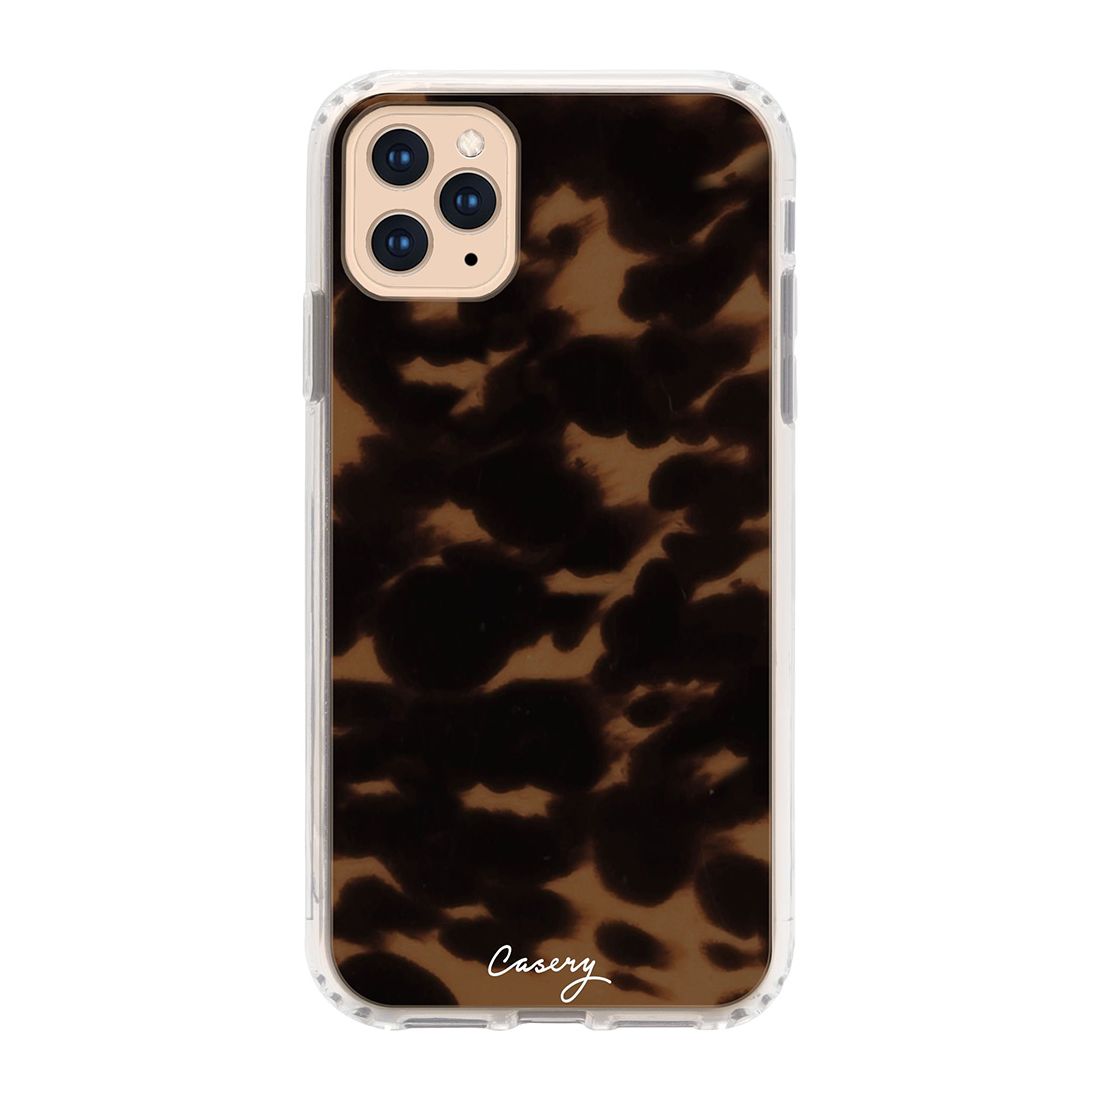 Casery Tortoise Shell Case for iPhone 12 Pro /12